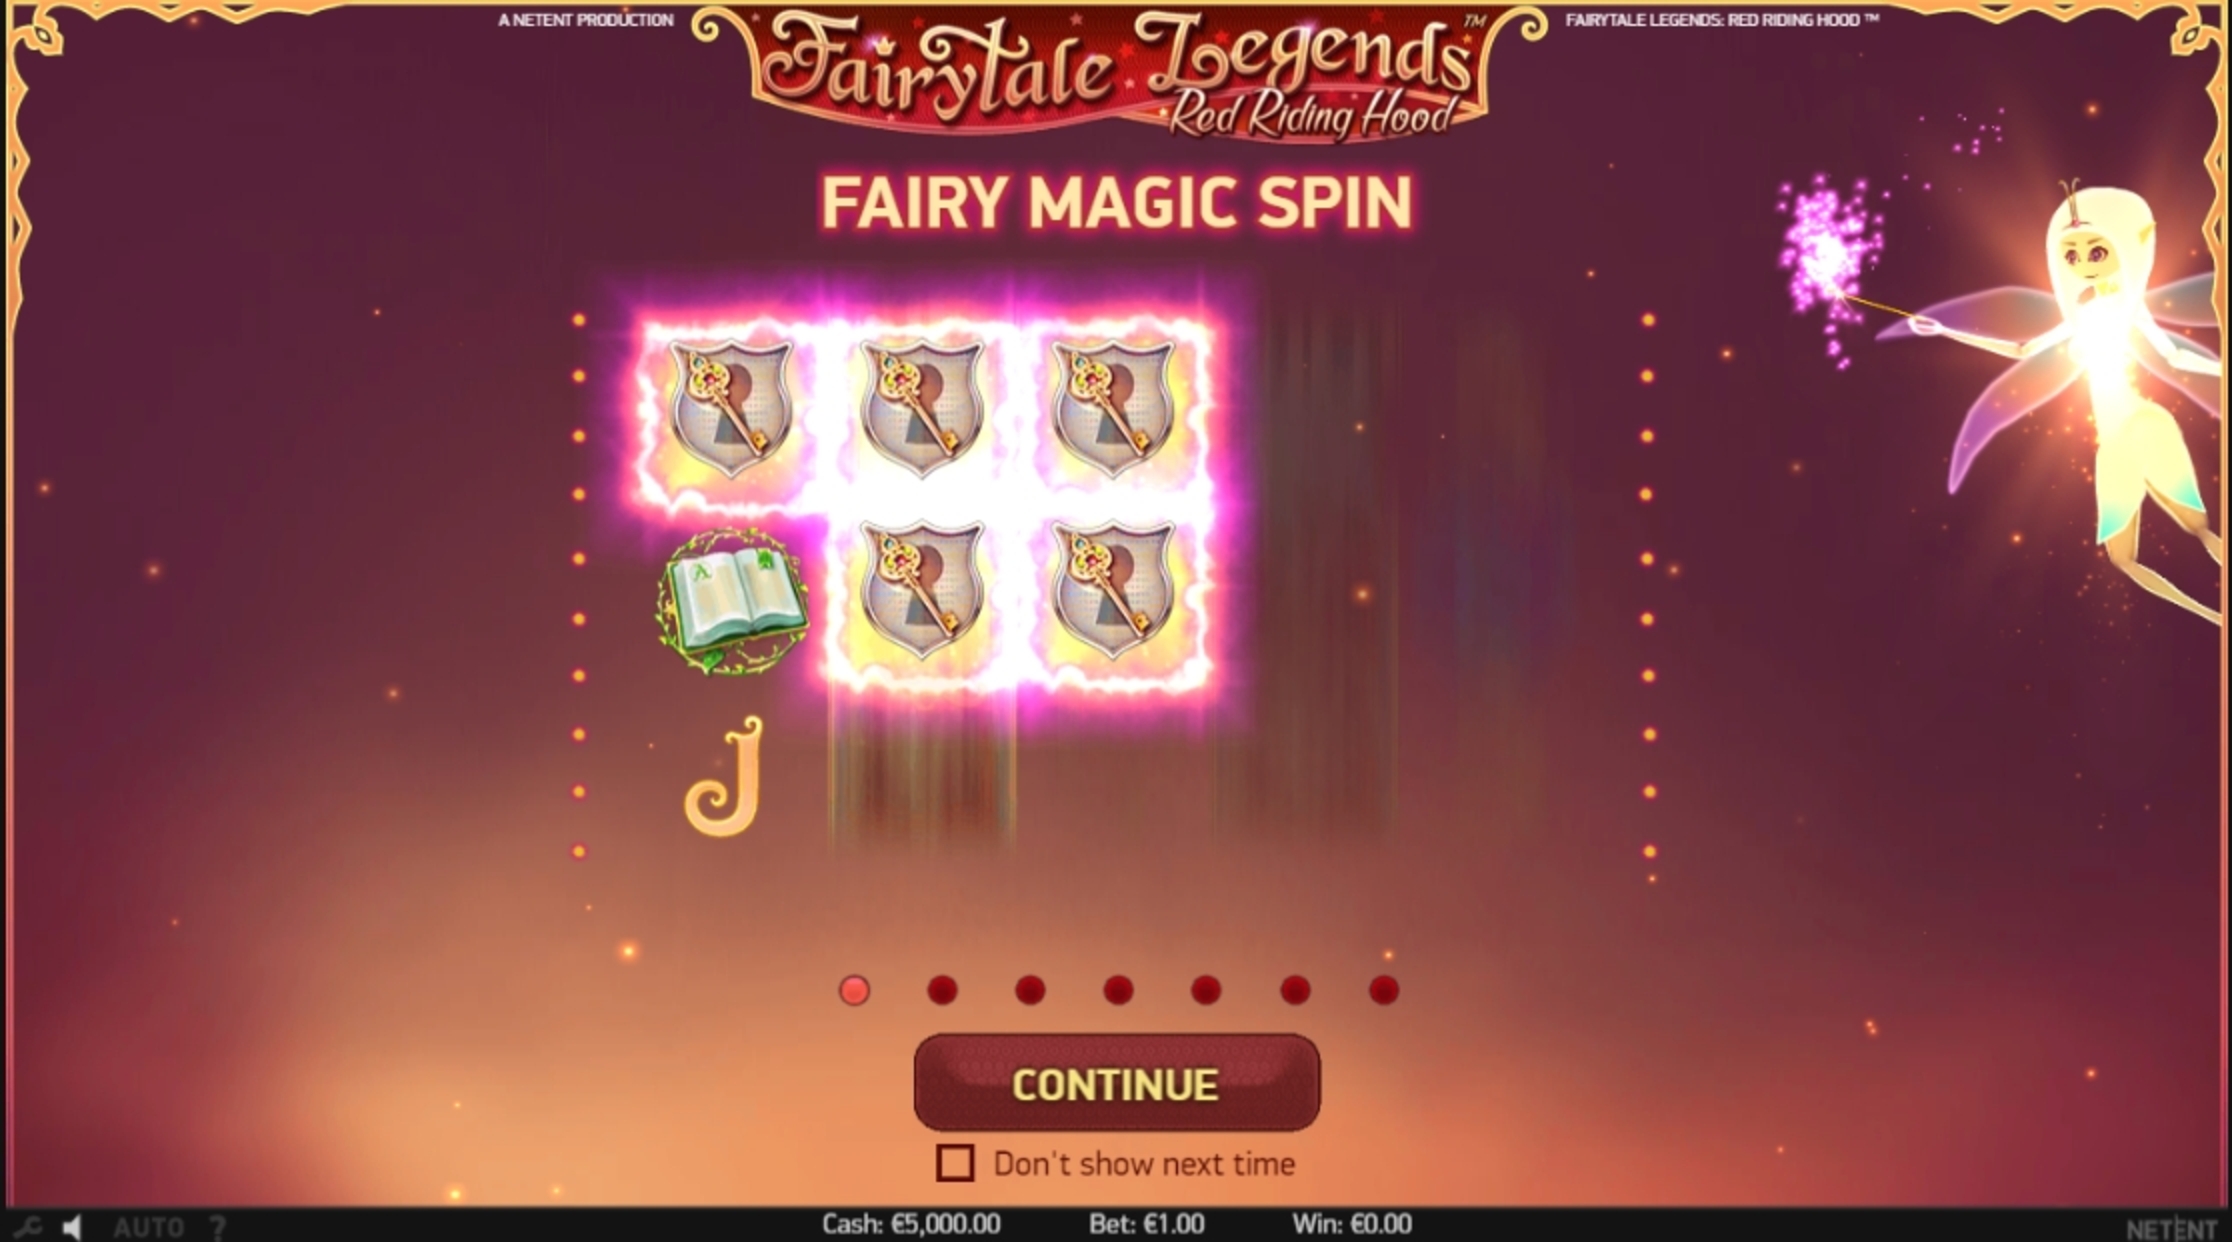 Play Fairytale Legends: Red Riding Hood Free Casino Slot Game by NetEnt